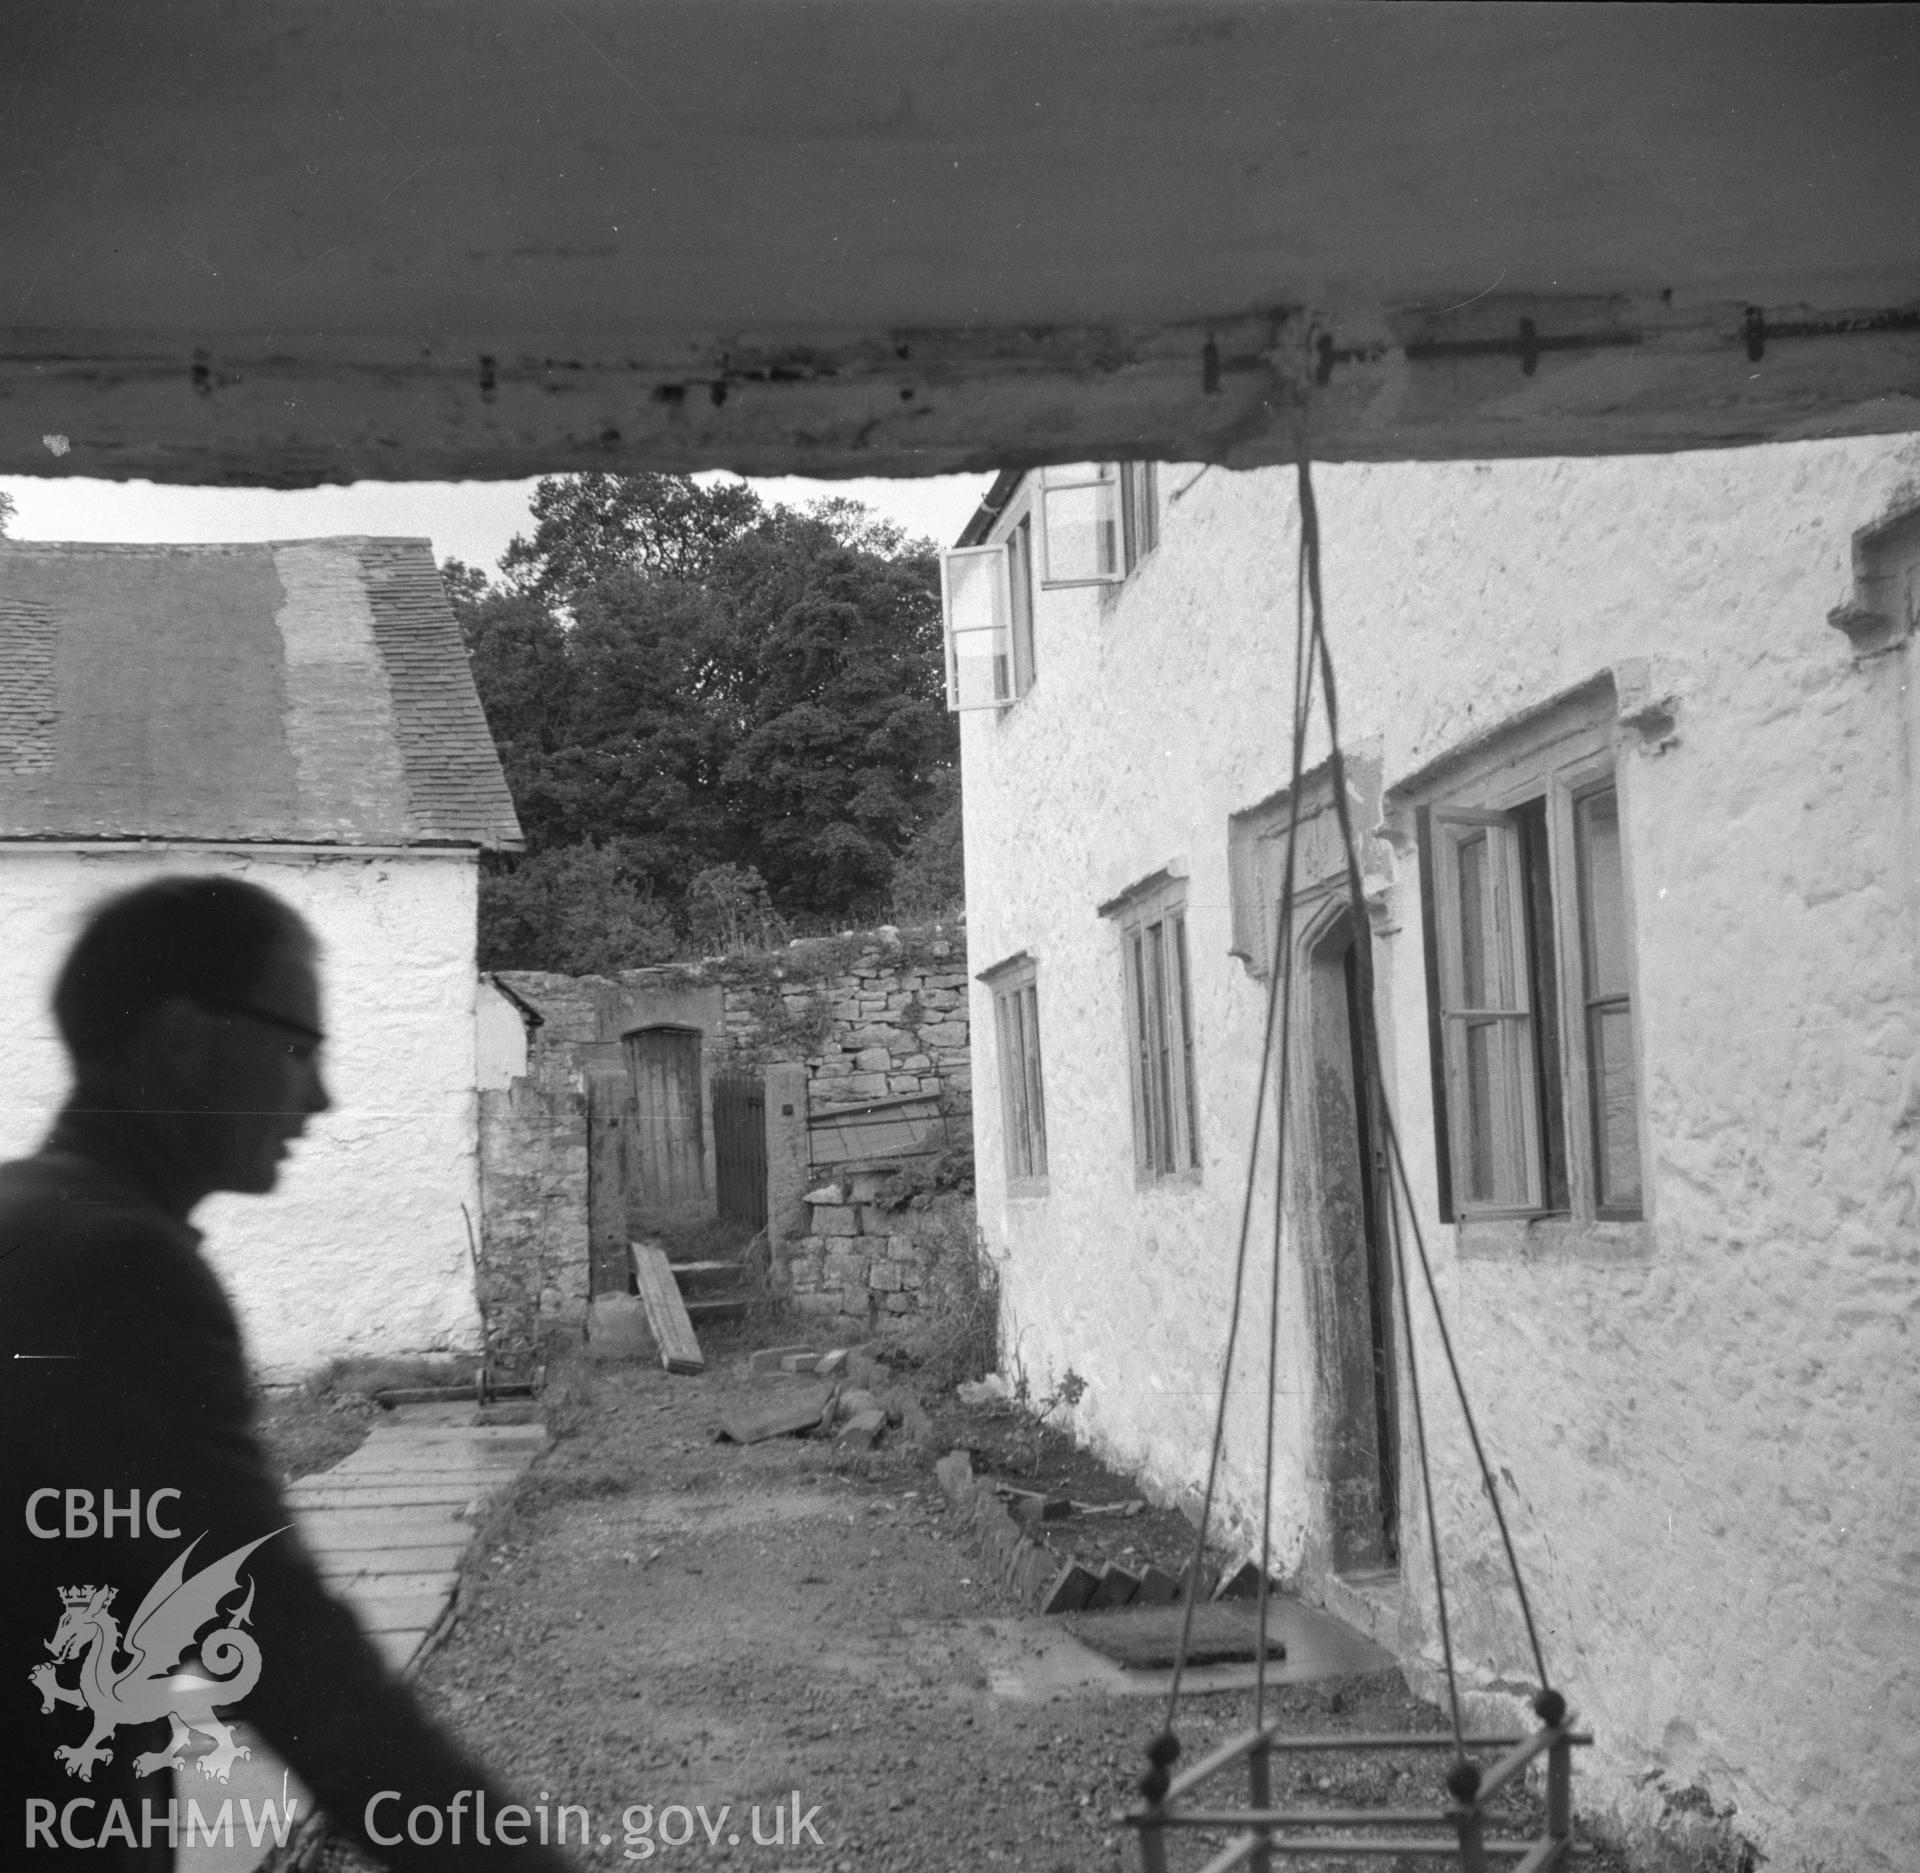 Digital copy of a black and white nitrate negative showing side elevation of Penyrorsedd Farmhouse.